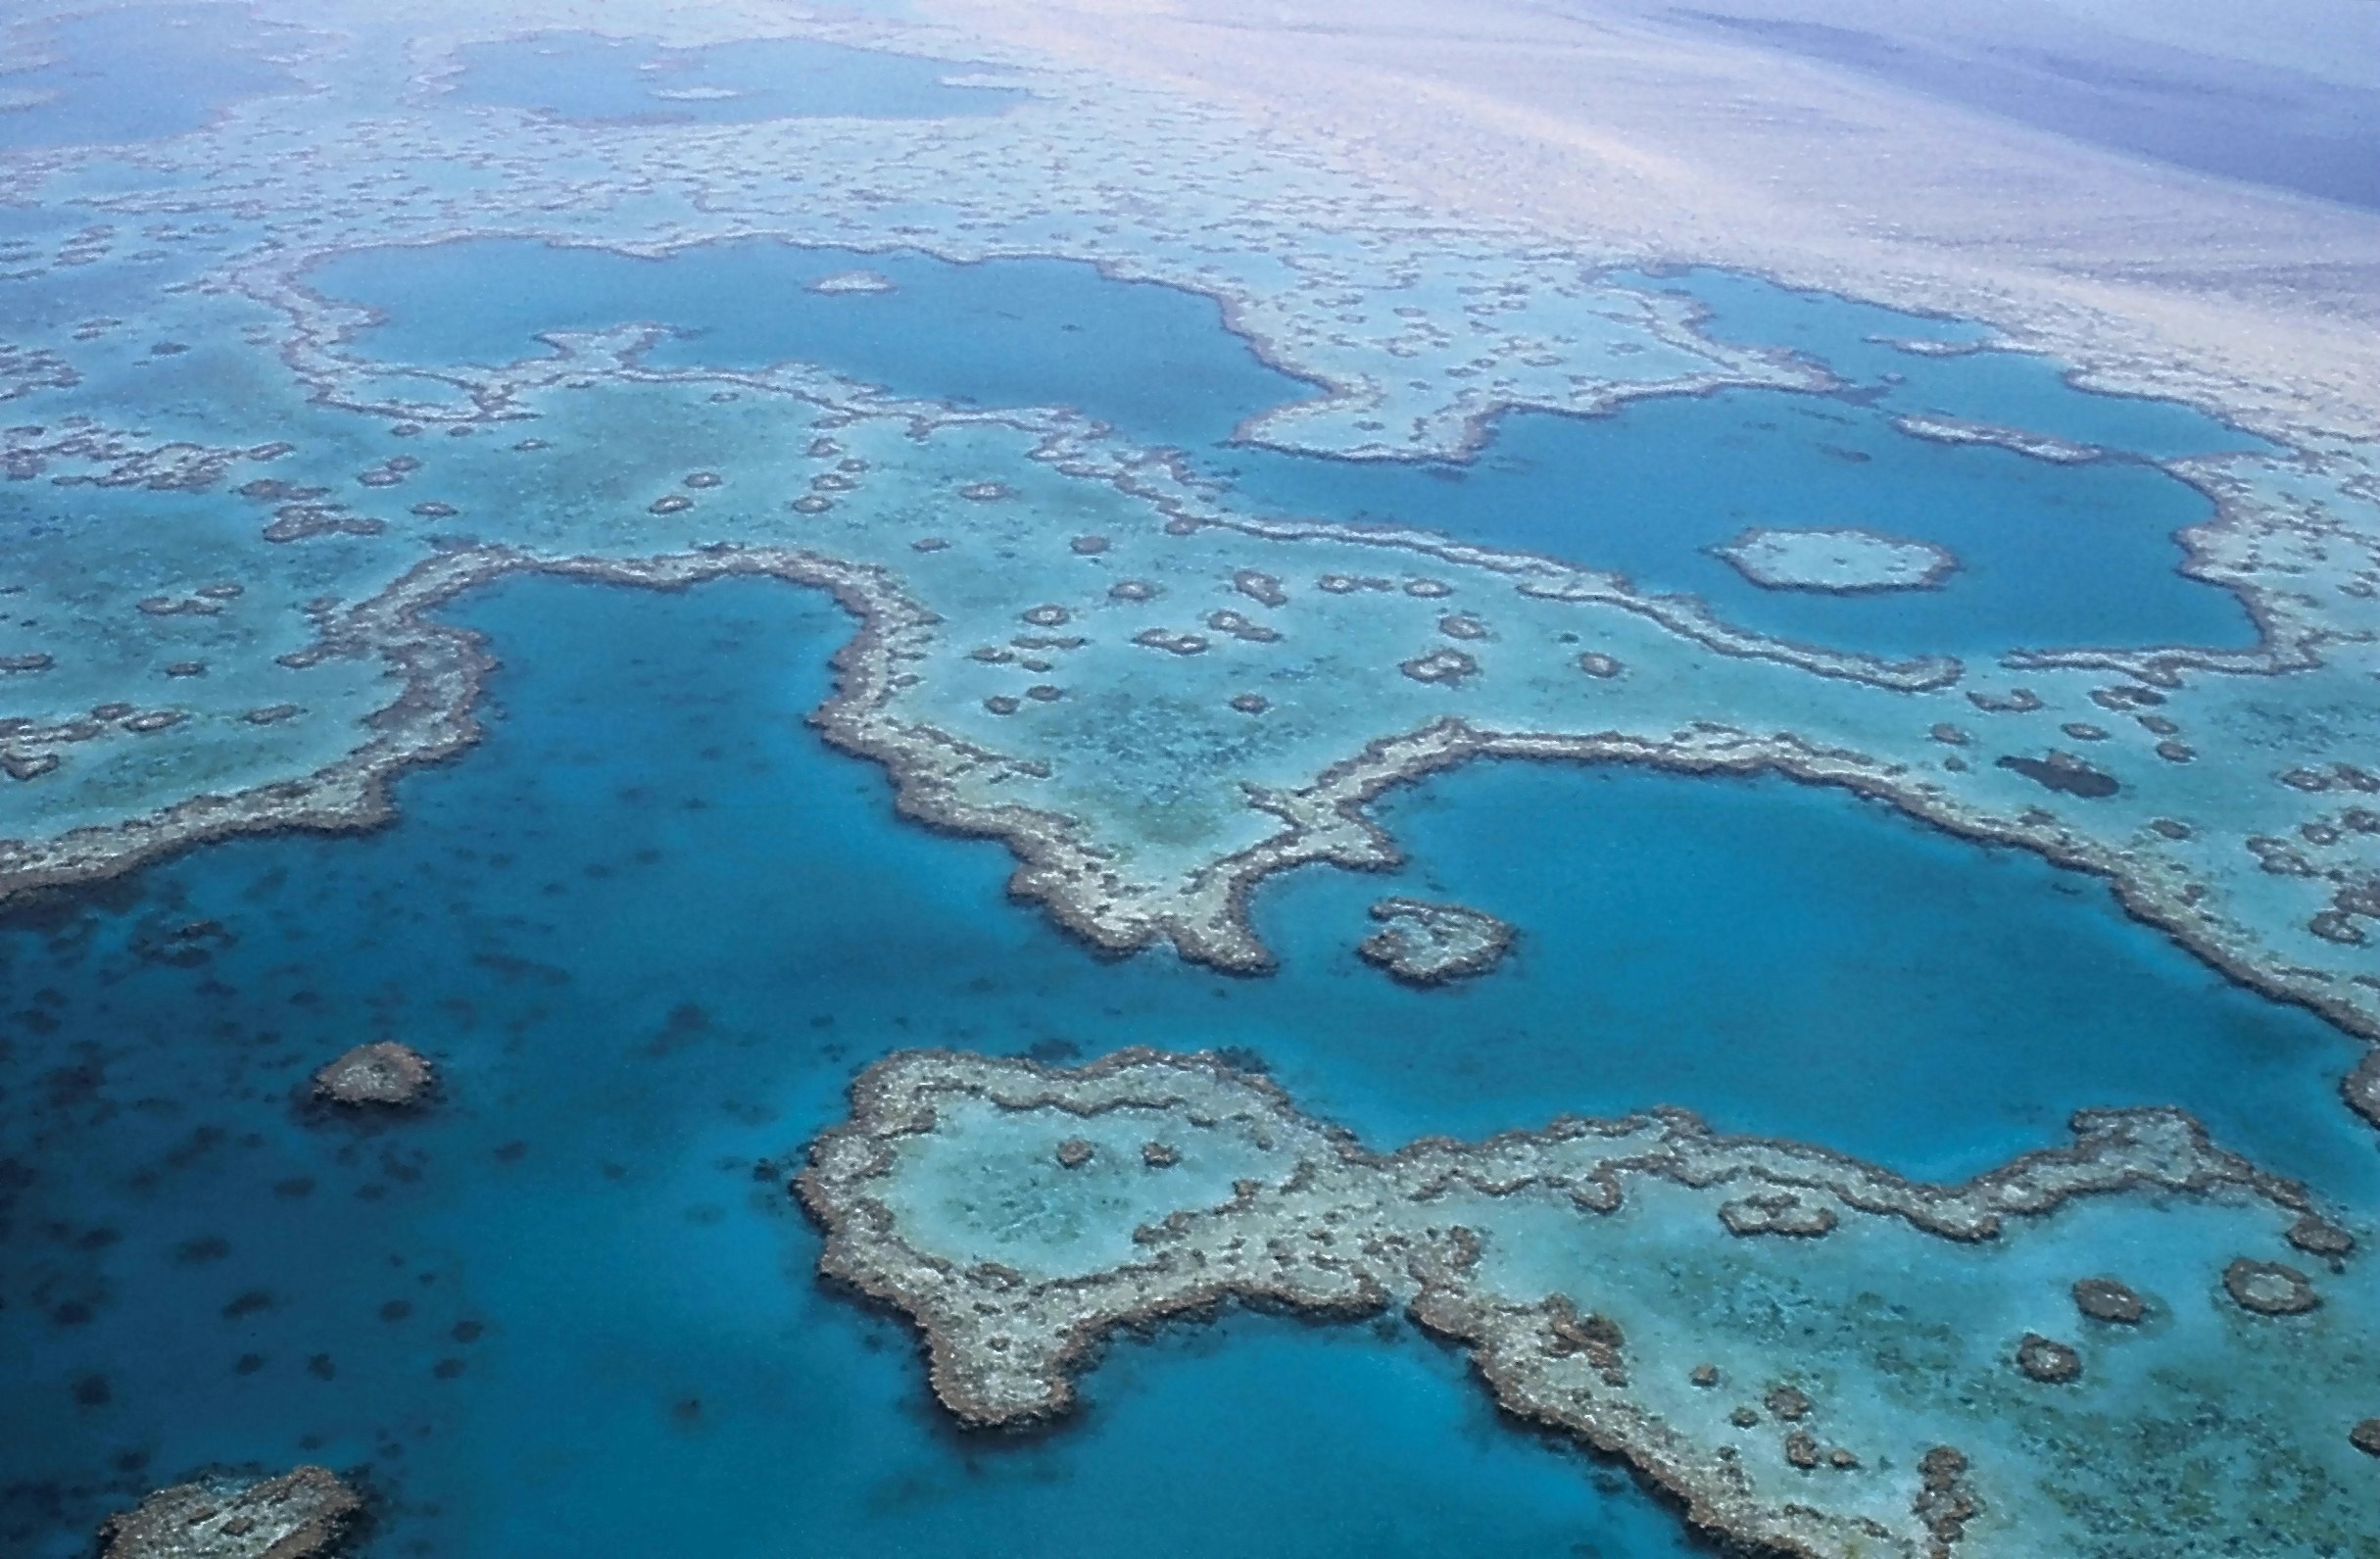 Coral reef viewed from the air